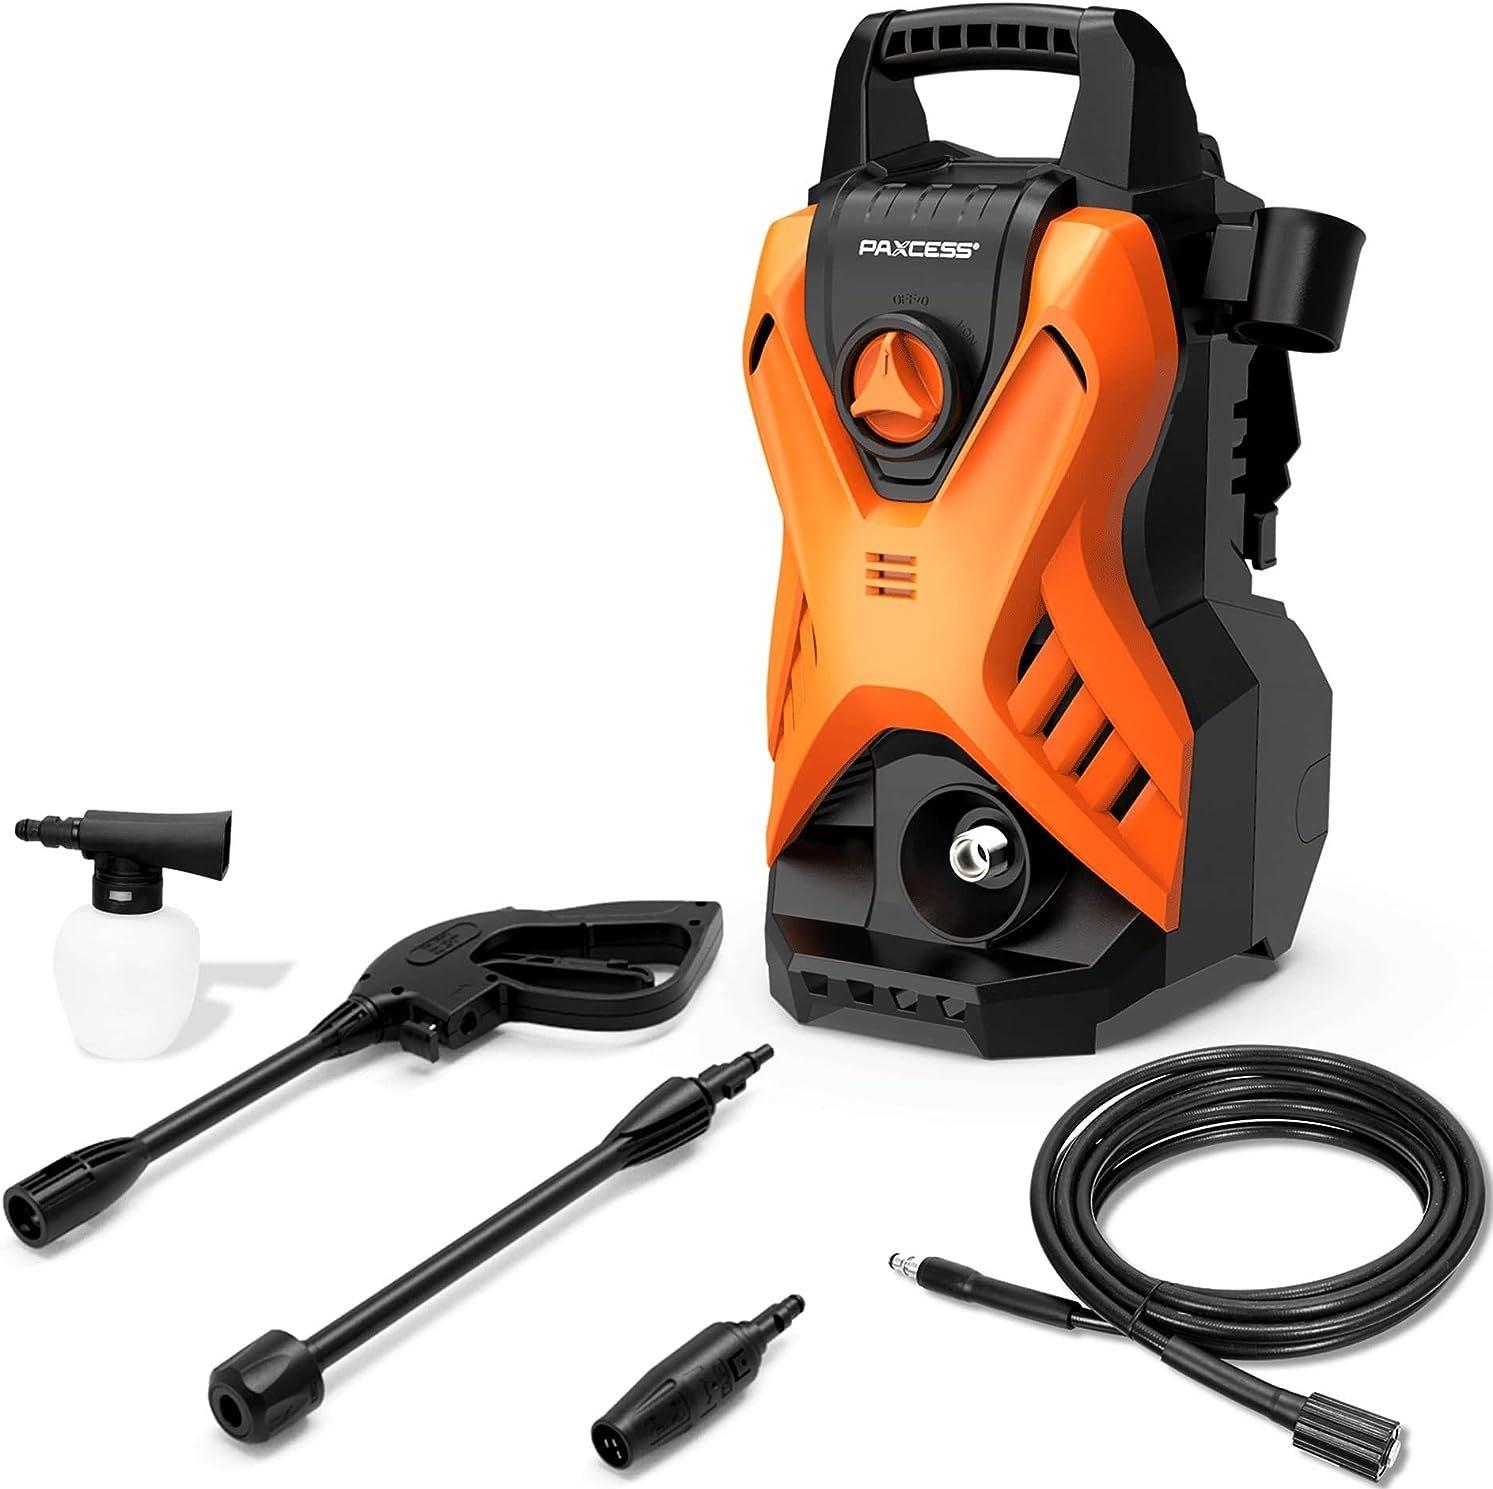 Paxcess  Portable Lightweight Electric Power Washer Machine with Adjustable Spray Nozzle - Black/Orange - Excellent